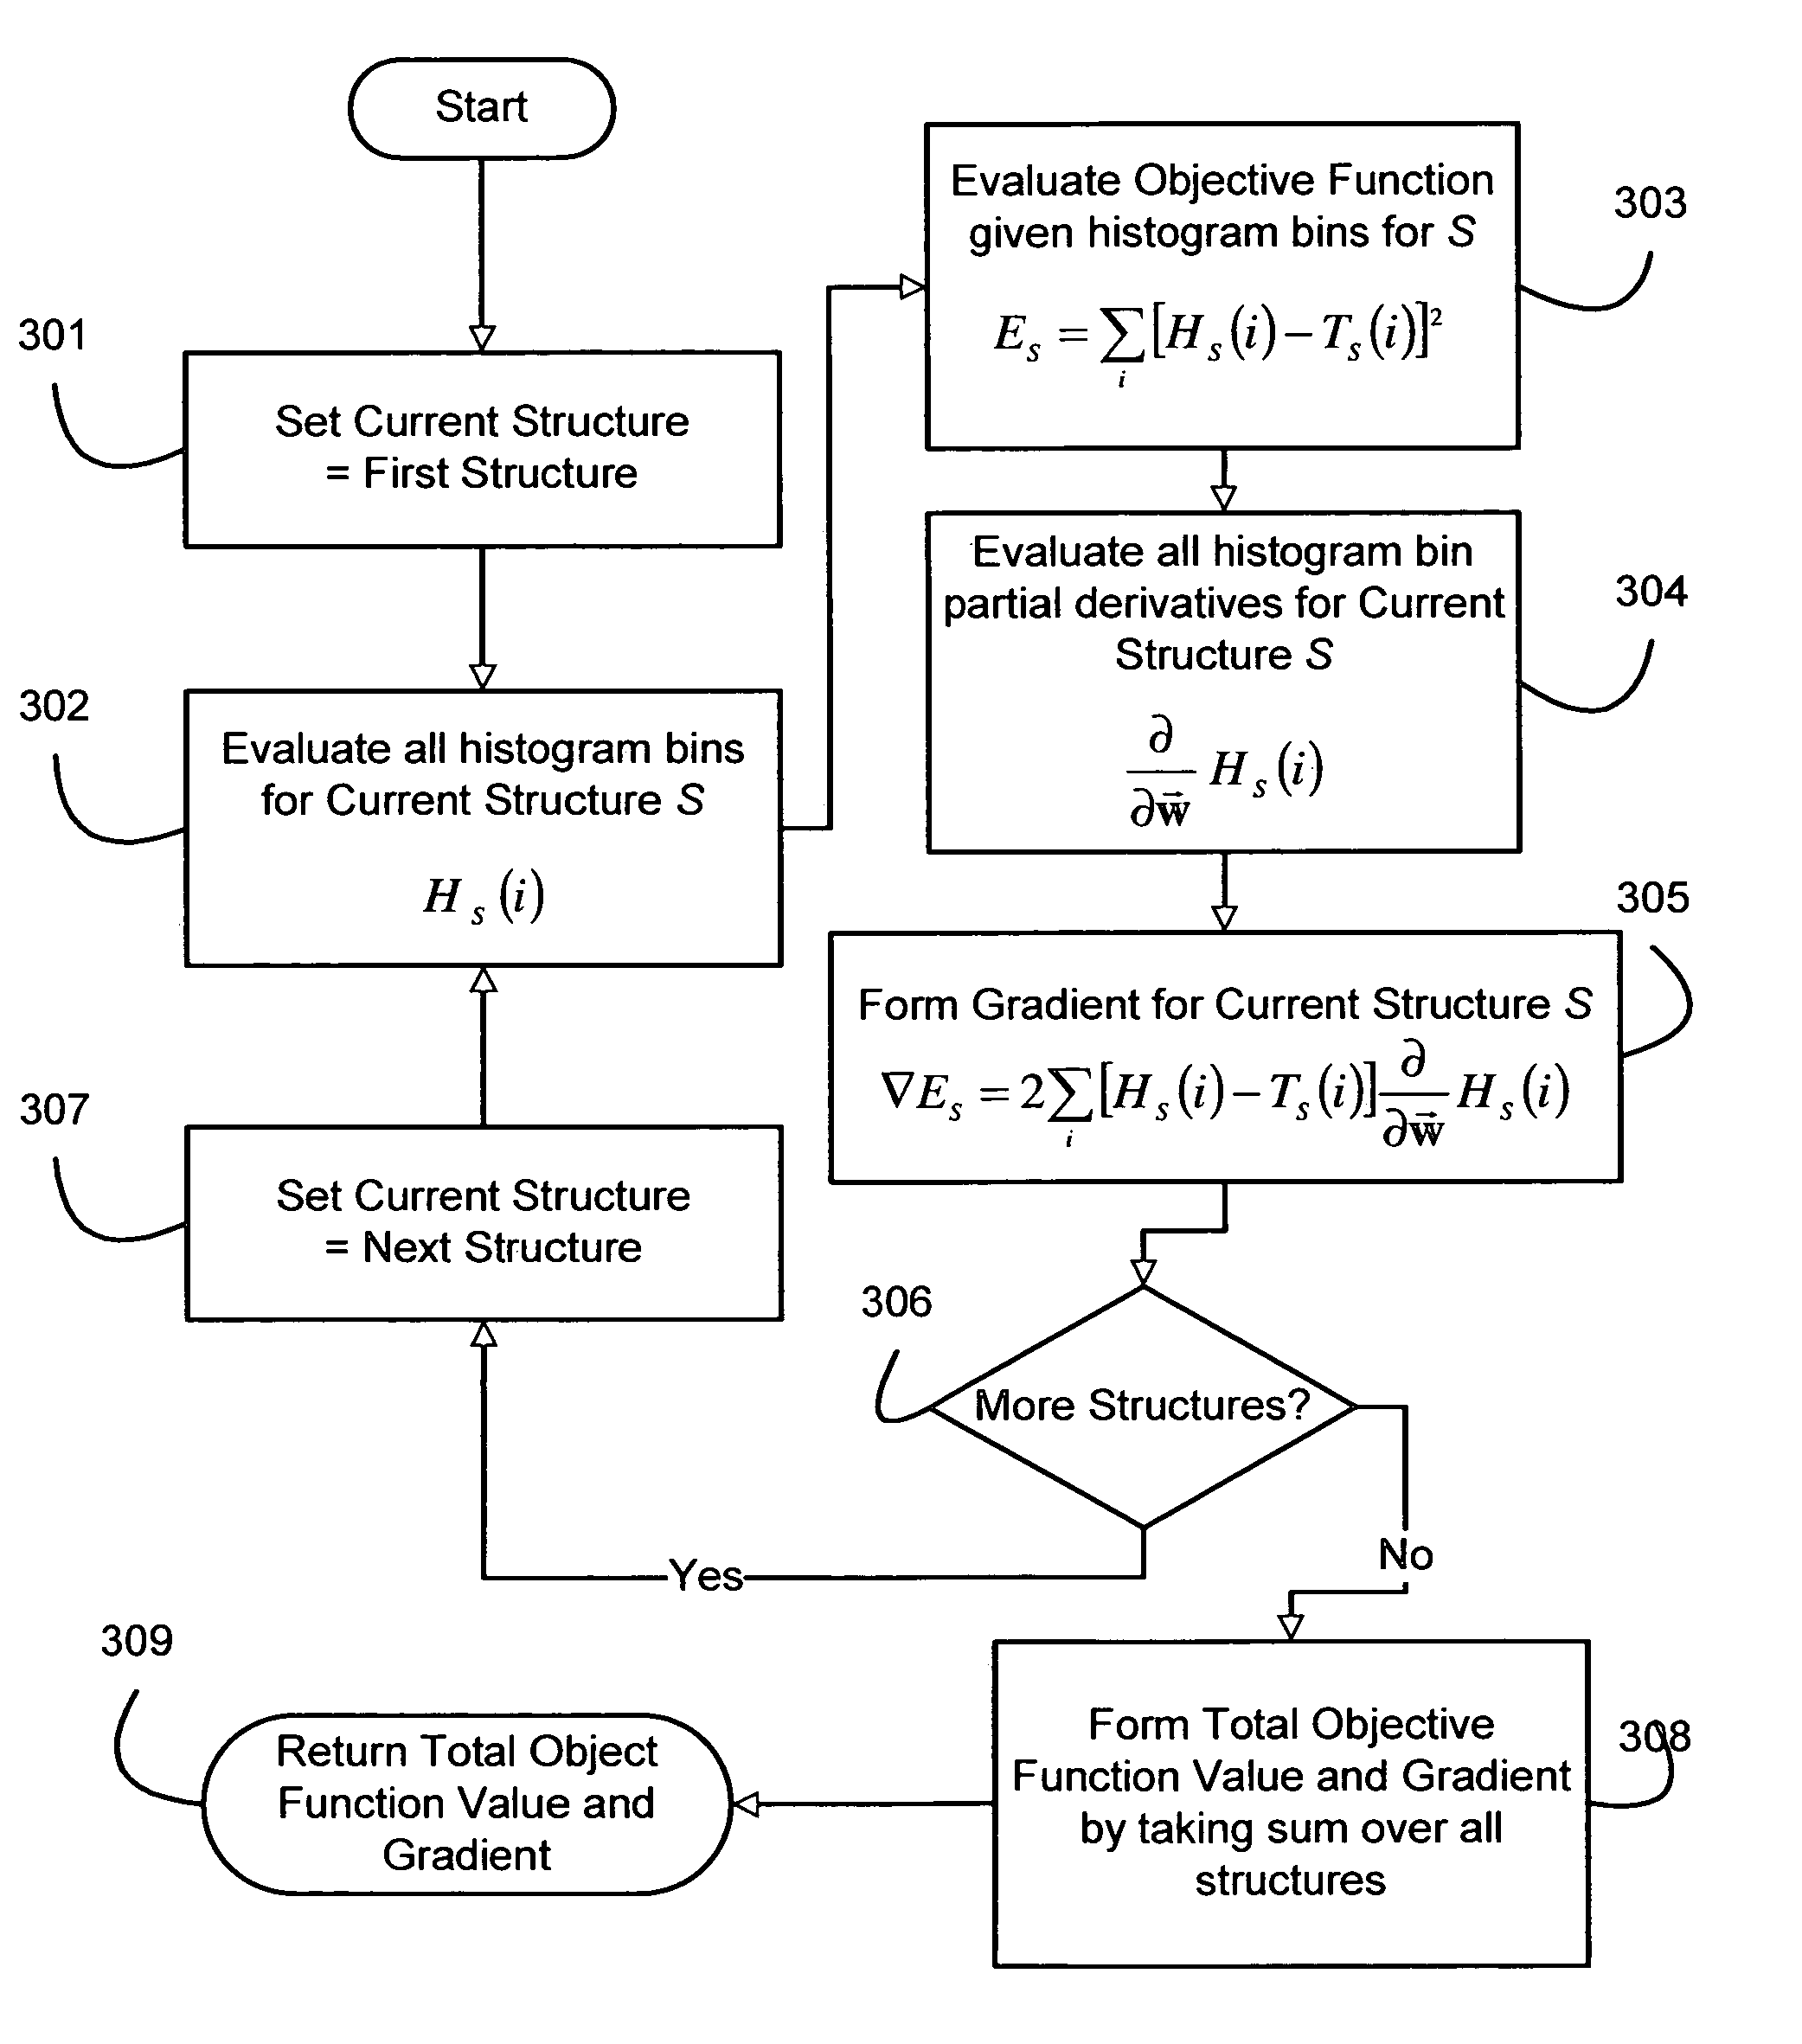 Information theoretic inverse planning technique for radiation treatment